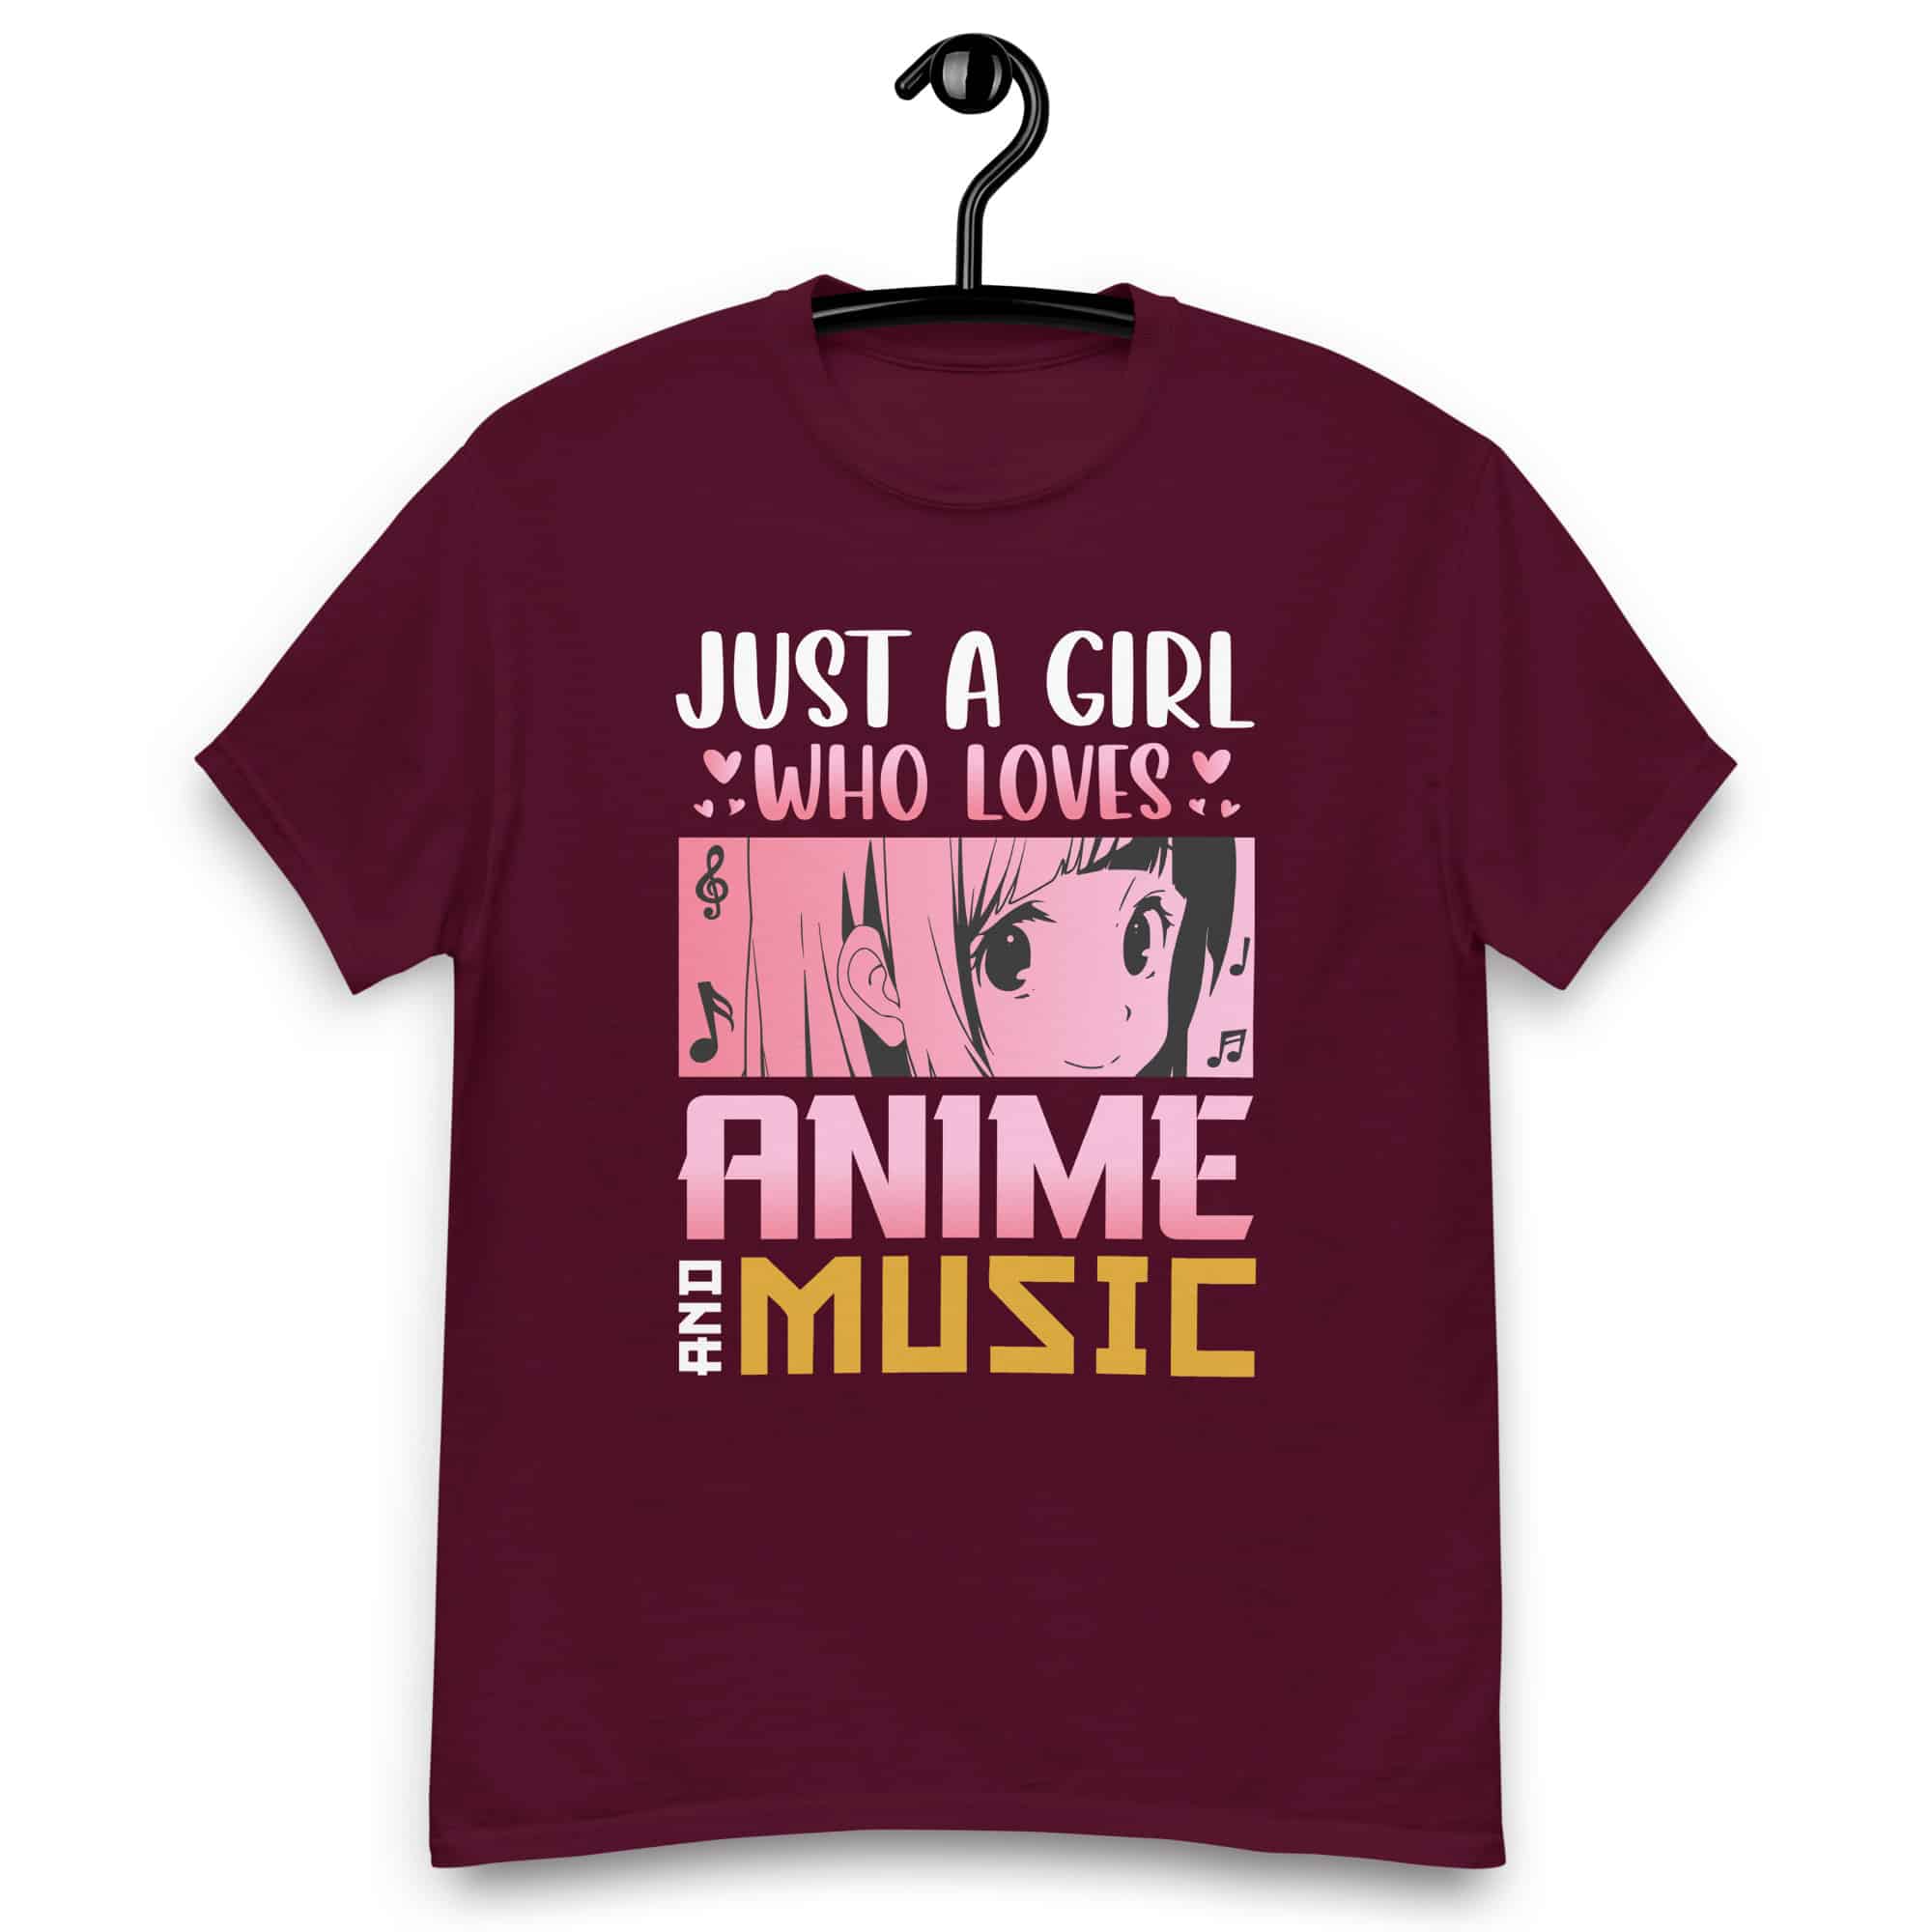 Girl Who Loves Anime Shirt Men's graphic t-shirts Men's designer shirts Premium sweatshirts Unisex hoodies Premium hooded sweatshirts Designer sweatshirts High-quality sweatshirts Luxury sweatshirts Unisex fleece sweatshirts Premium pullover sweatshirts Unisex heavyweight sweatshirts Premium cotton sweatshirts Video game store Gaming merchandise Gaming accessories shop Online gaming store Video game shop near me Gaming console store PC gaming store Gaming gear shop Retro gaming shop Board game shop Anime merchandise Anime store online Japanese anime shop Anime figurines Manga shop Anime DVDs Anime accessories Anime apparel Anime collectibles Anime gifts